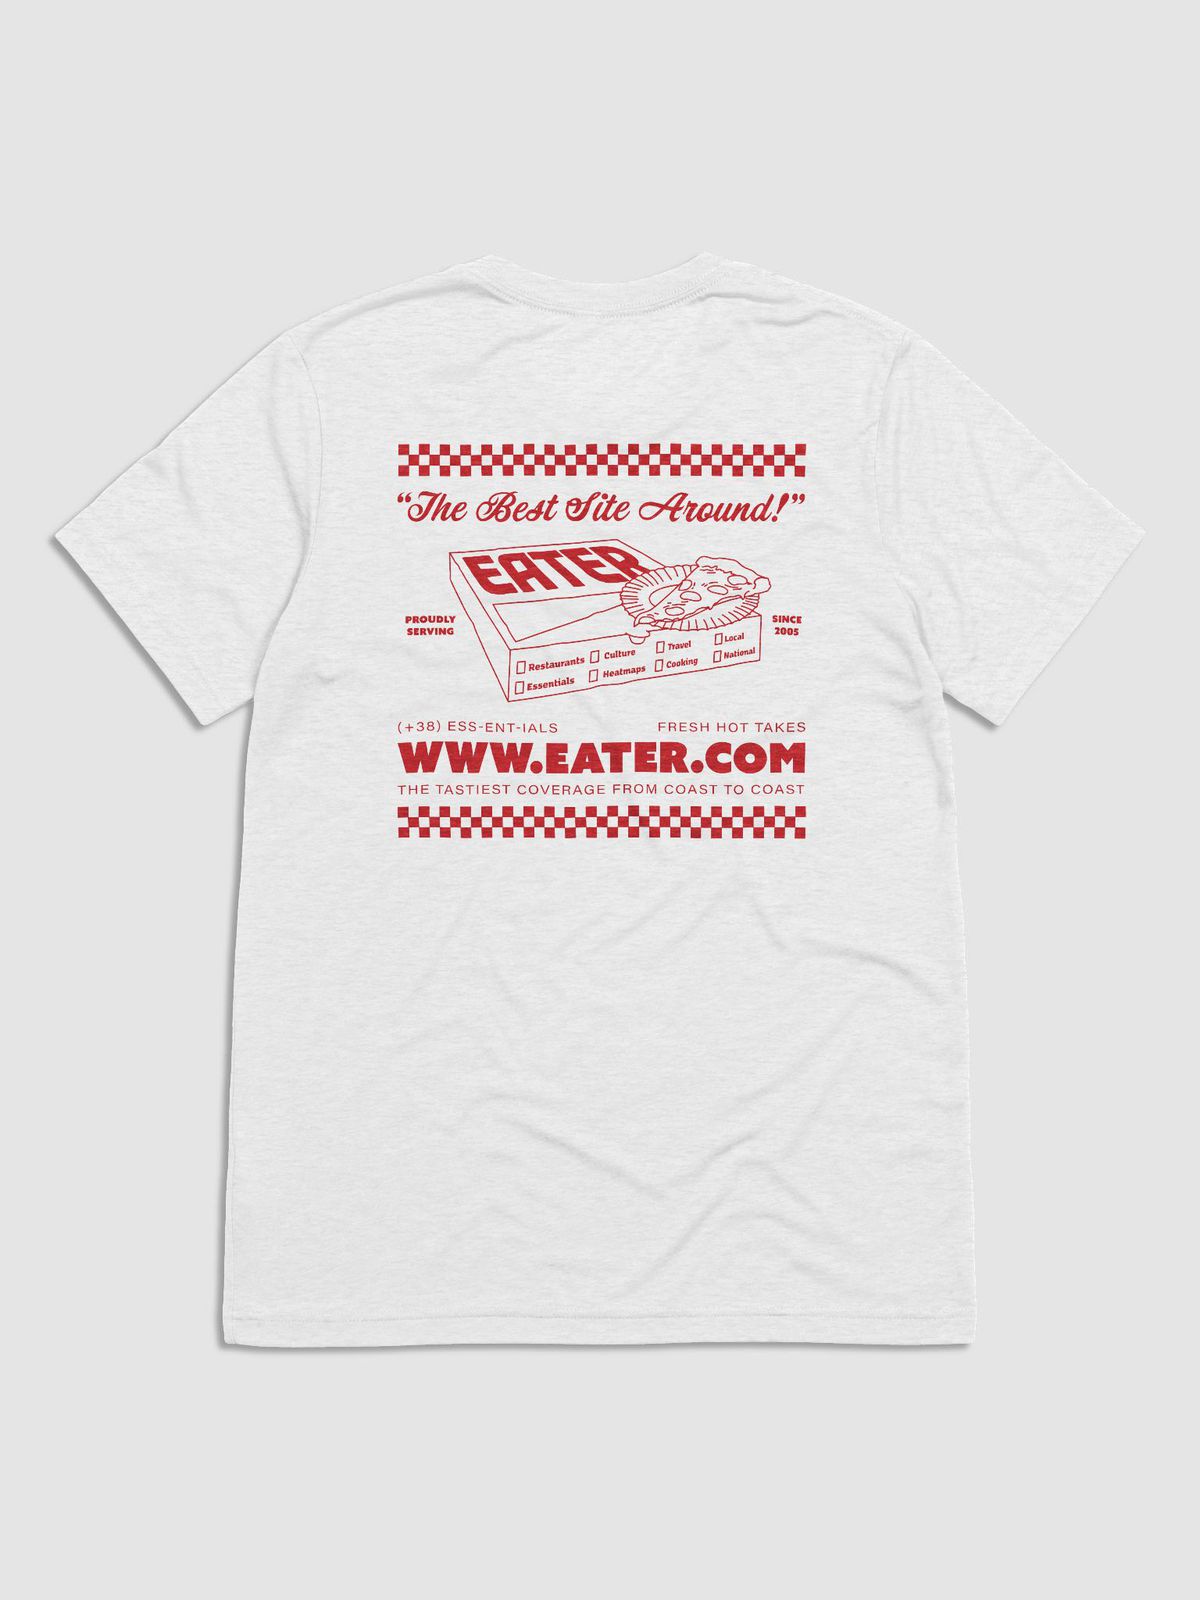 White t-shirt with red lettering.